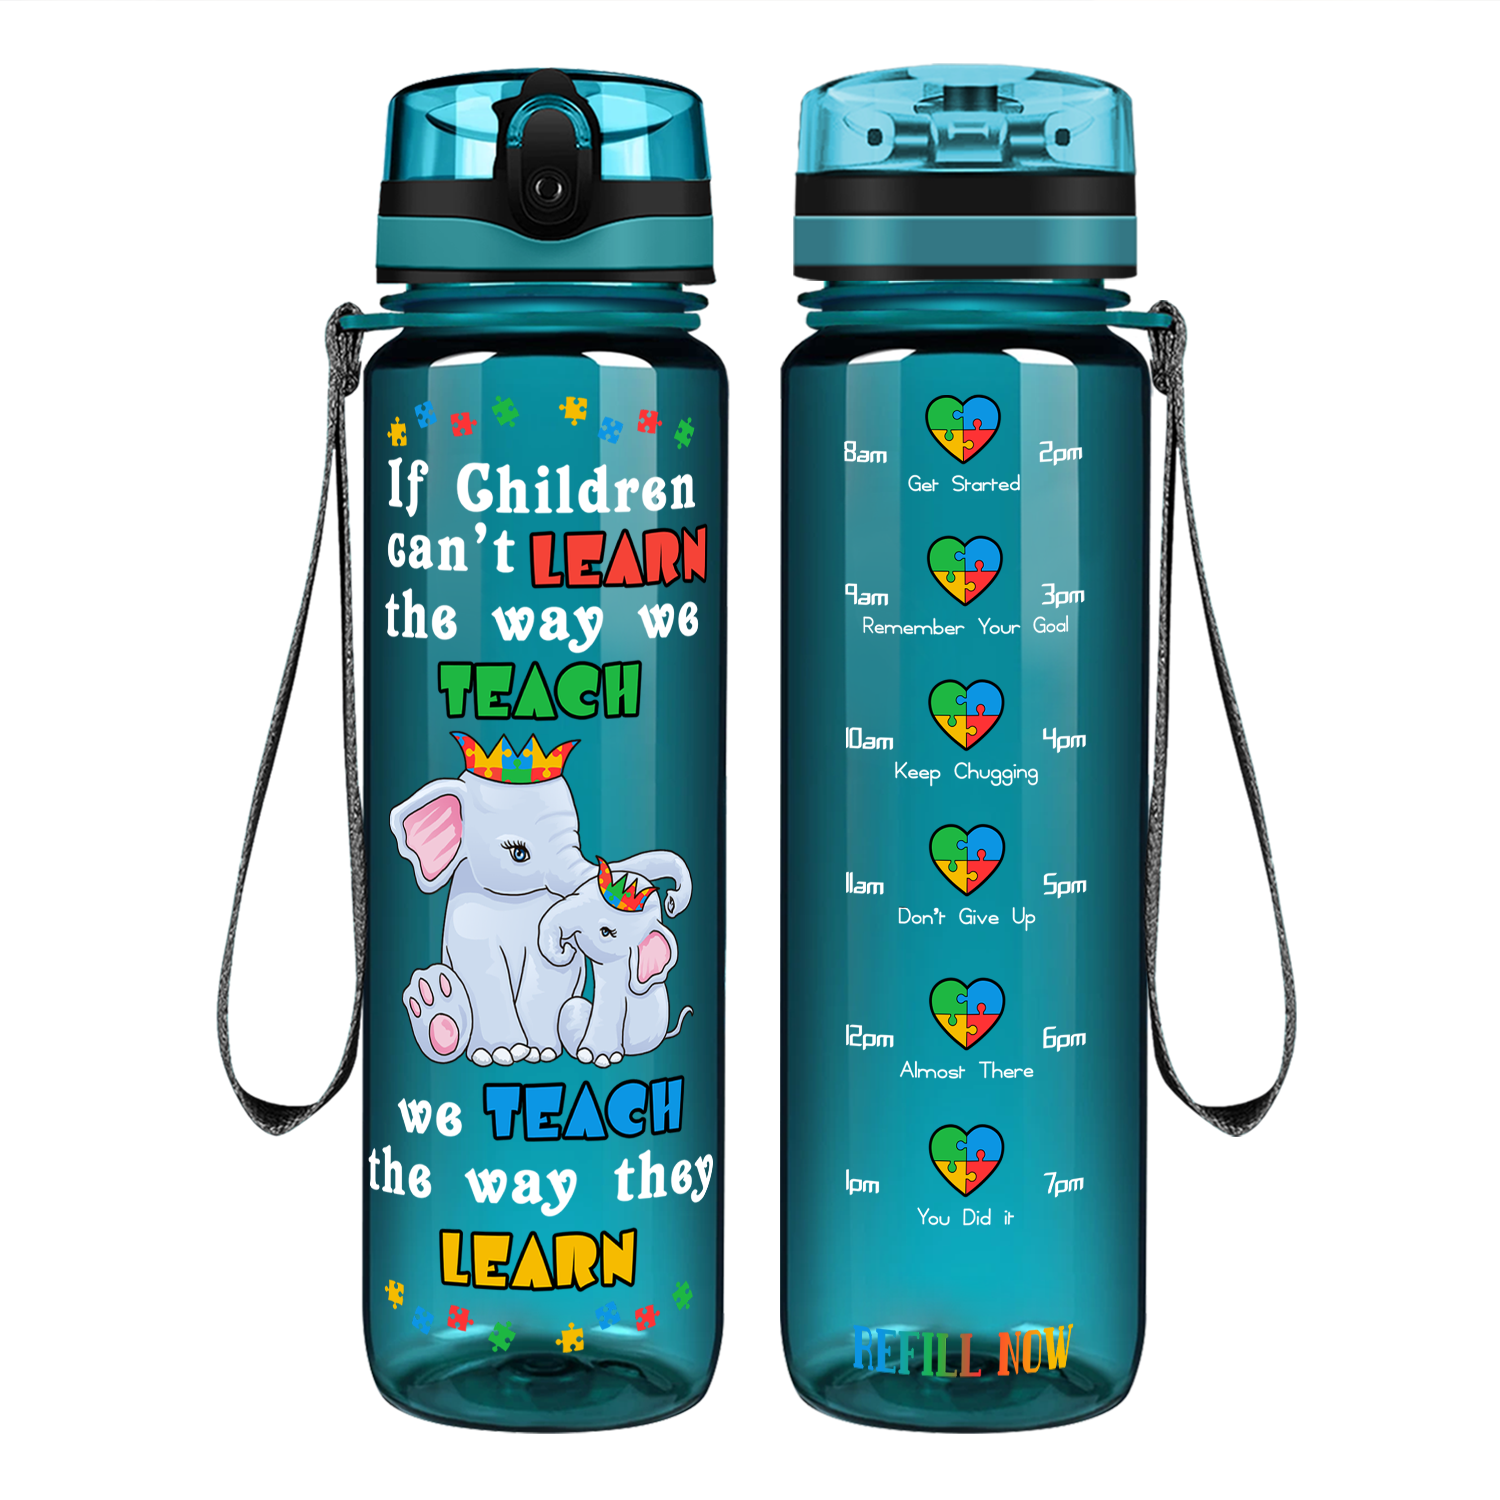 Teach The Way They Learn Elephants Motivational Tracking Water Bottle